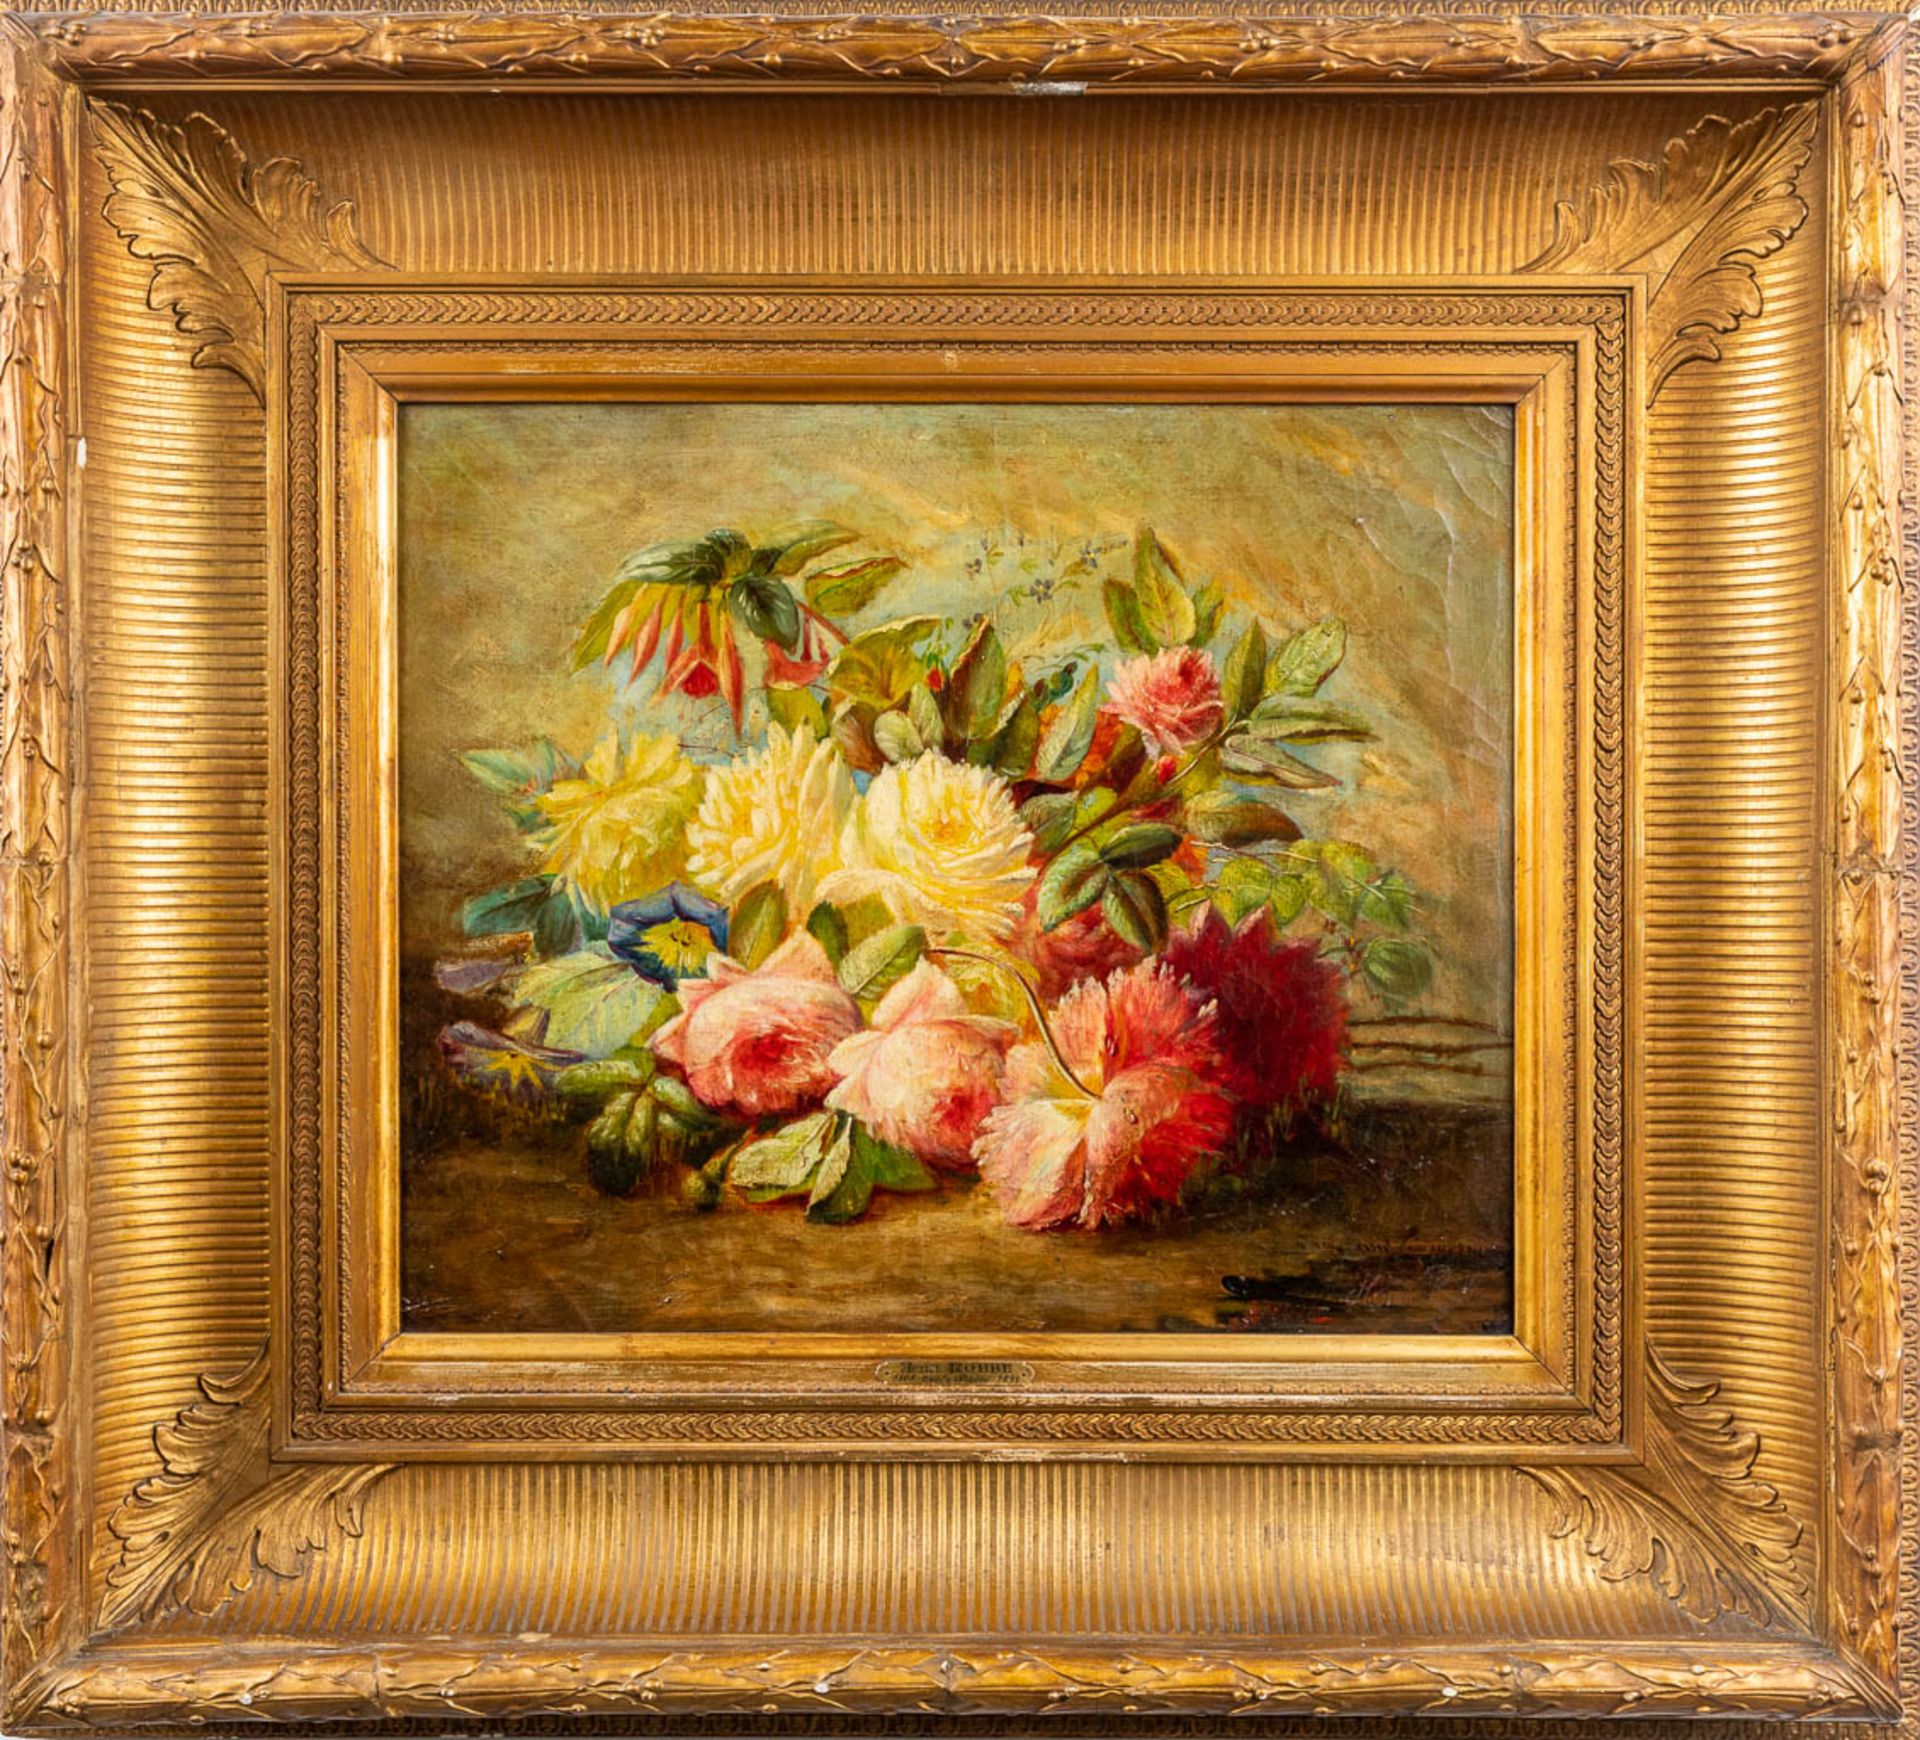 Henri ROBBE (1807-1899) 'Flower' oil on canvas. (W: 55 x H: 46 cm) - Image 3 of 11